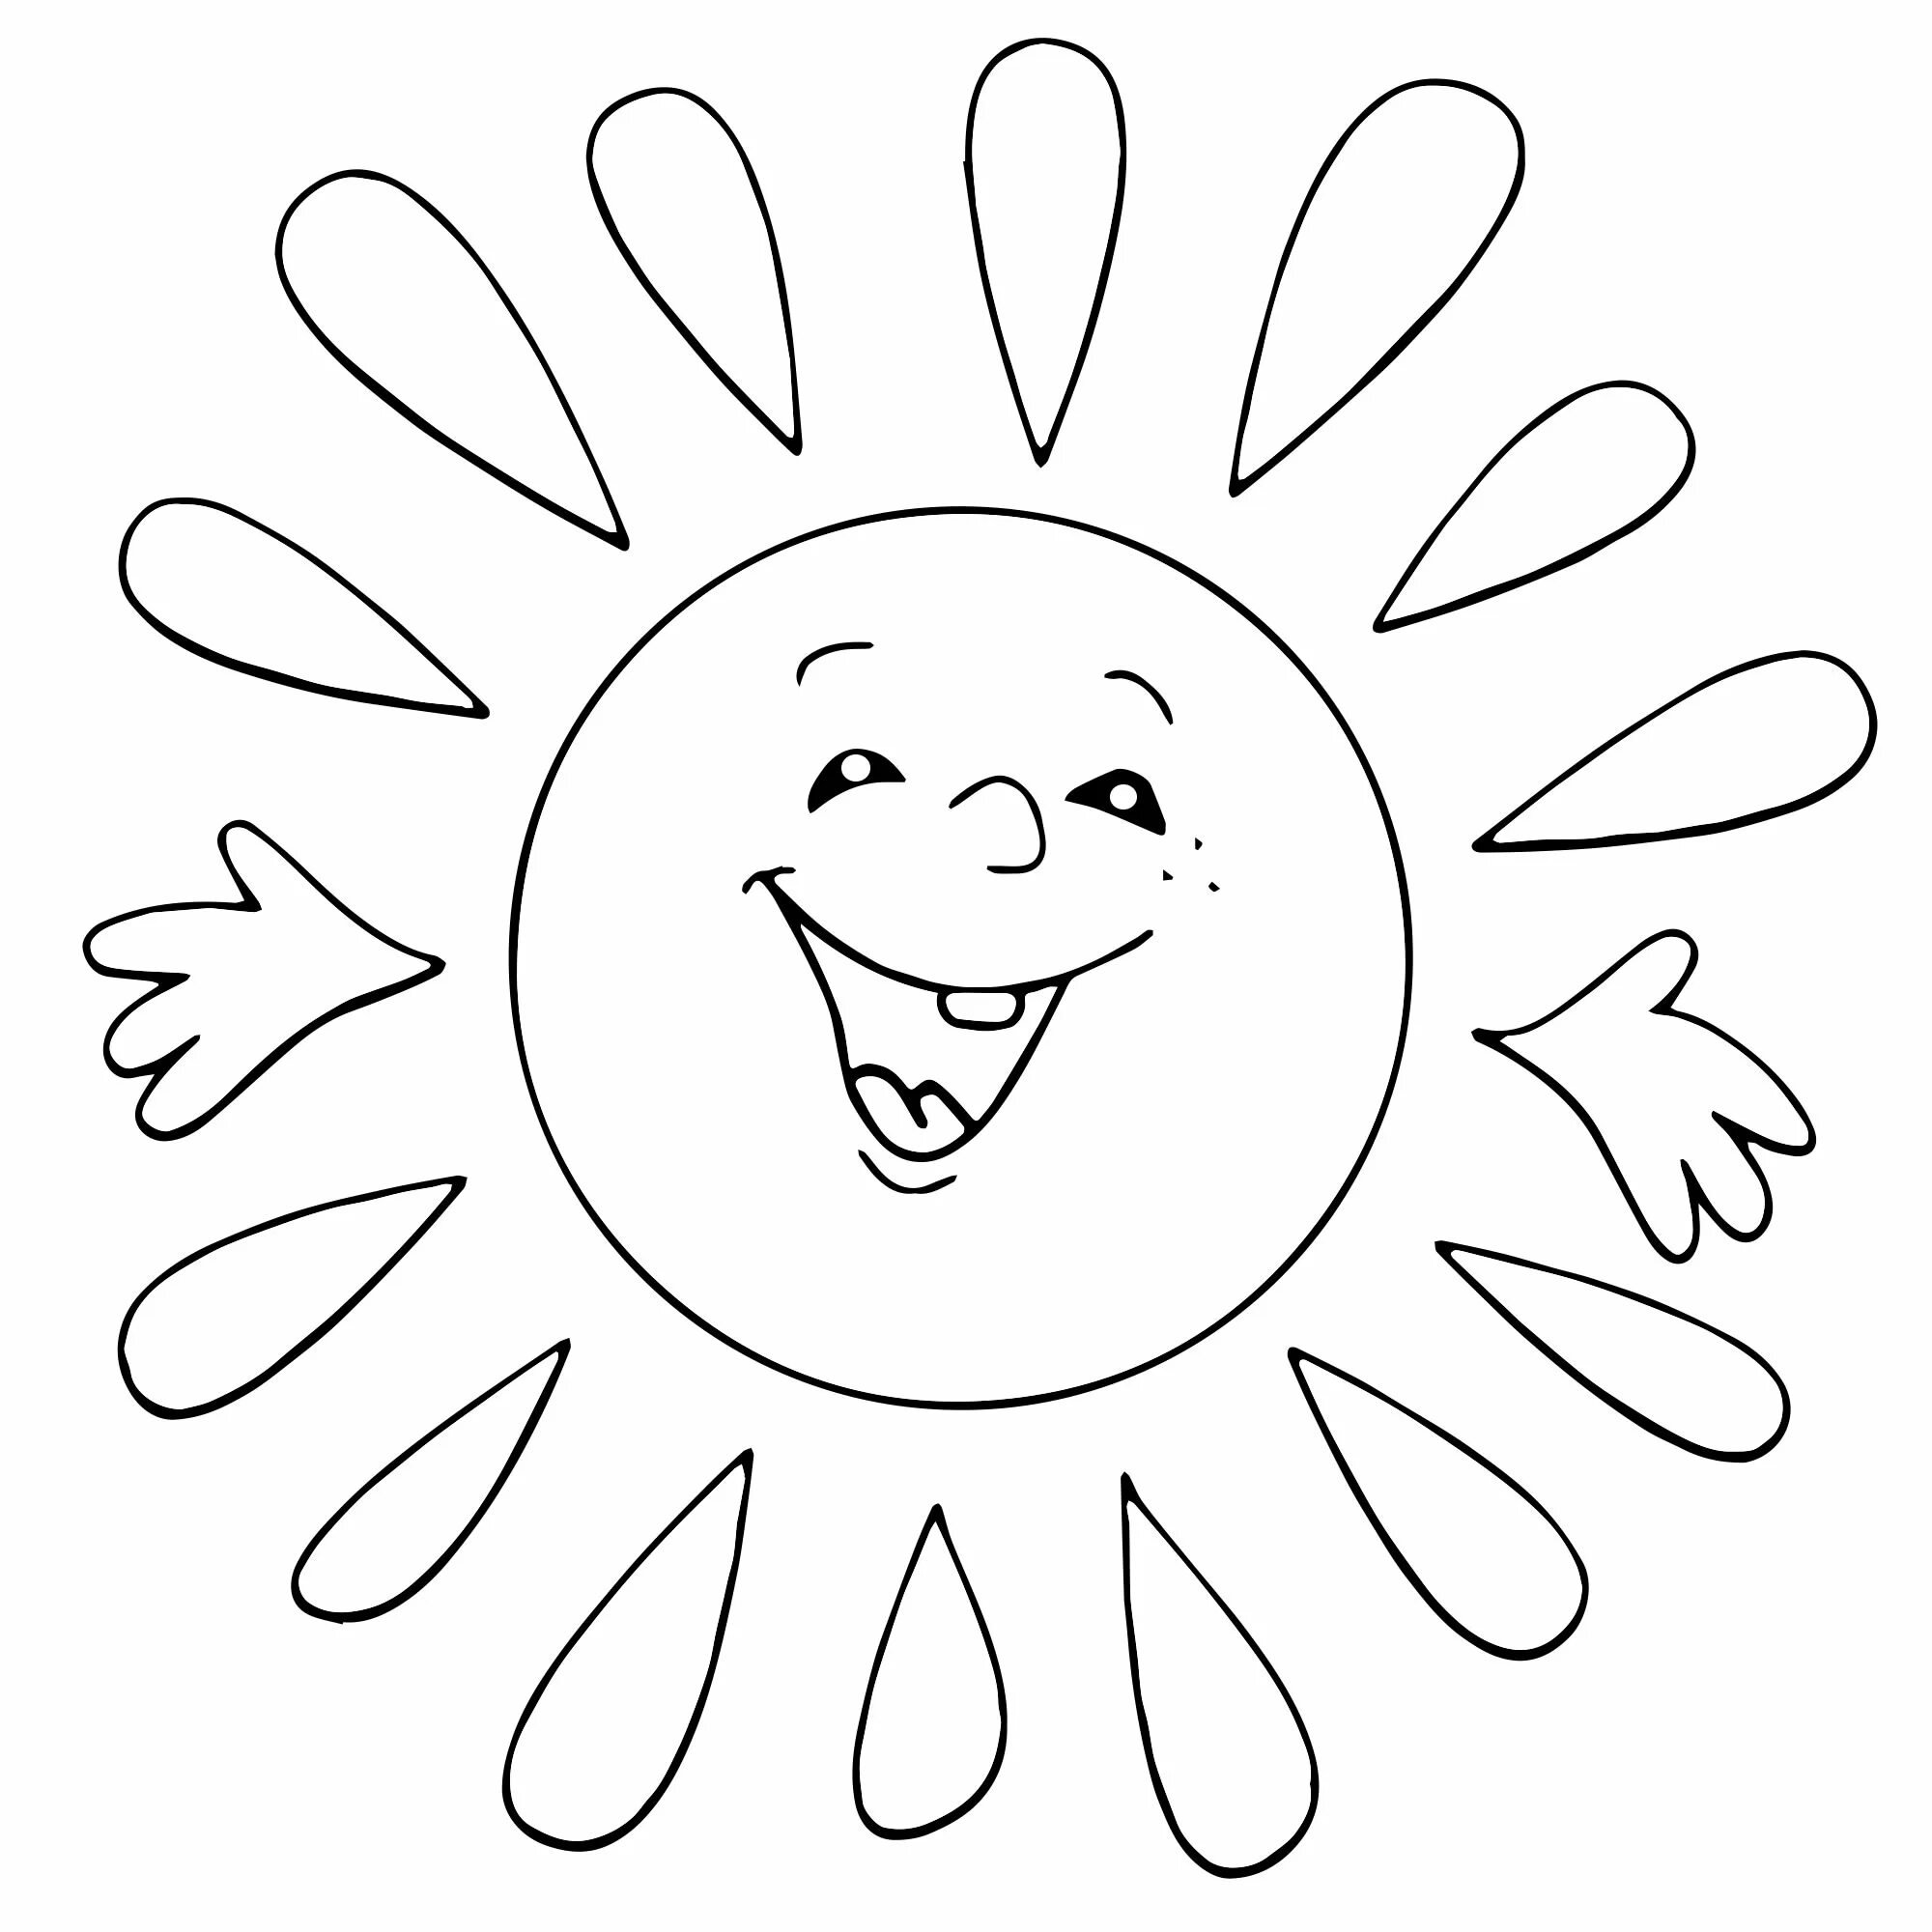 A fascinating coloring of the sun with a smile